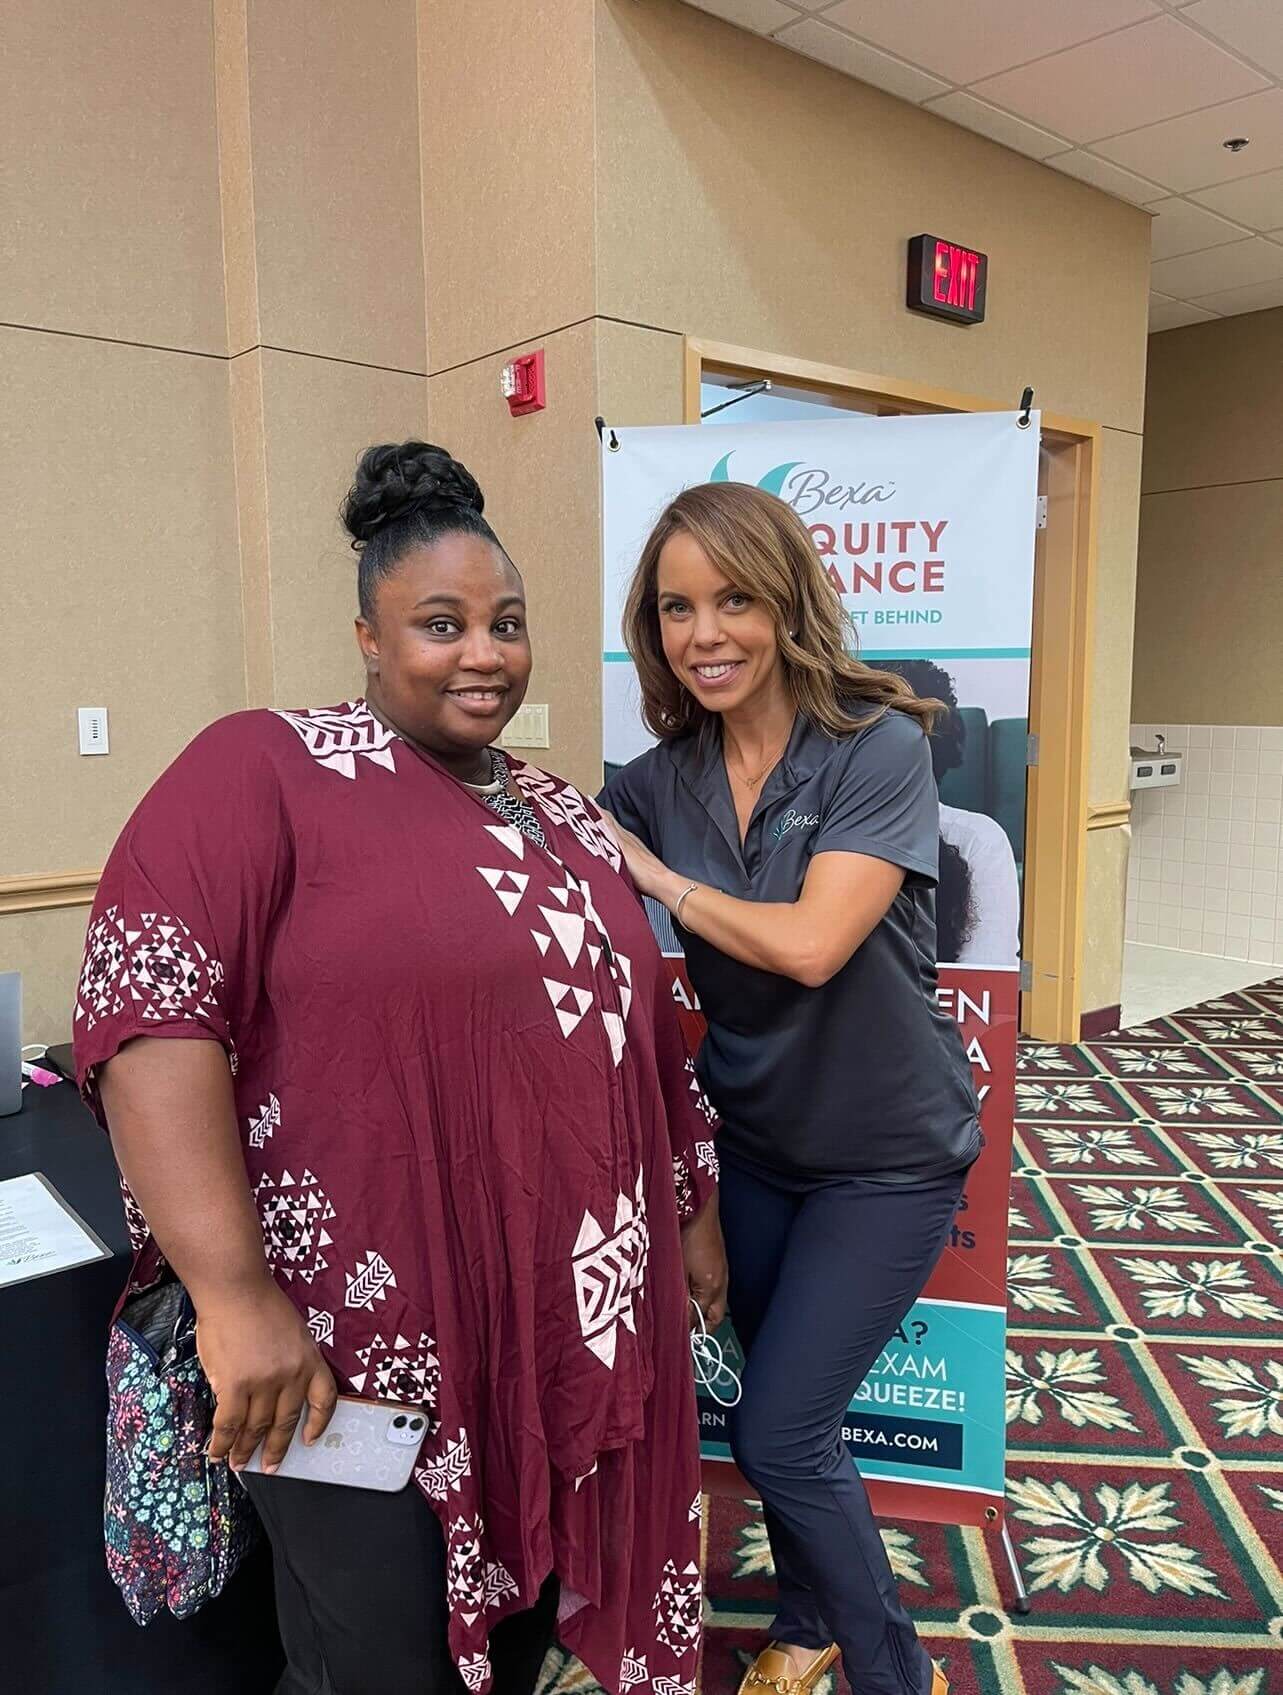 Tiara Neal at a Bexa Equity Alliance event